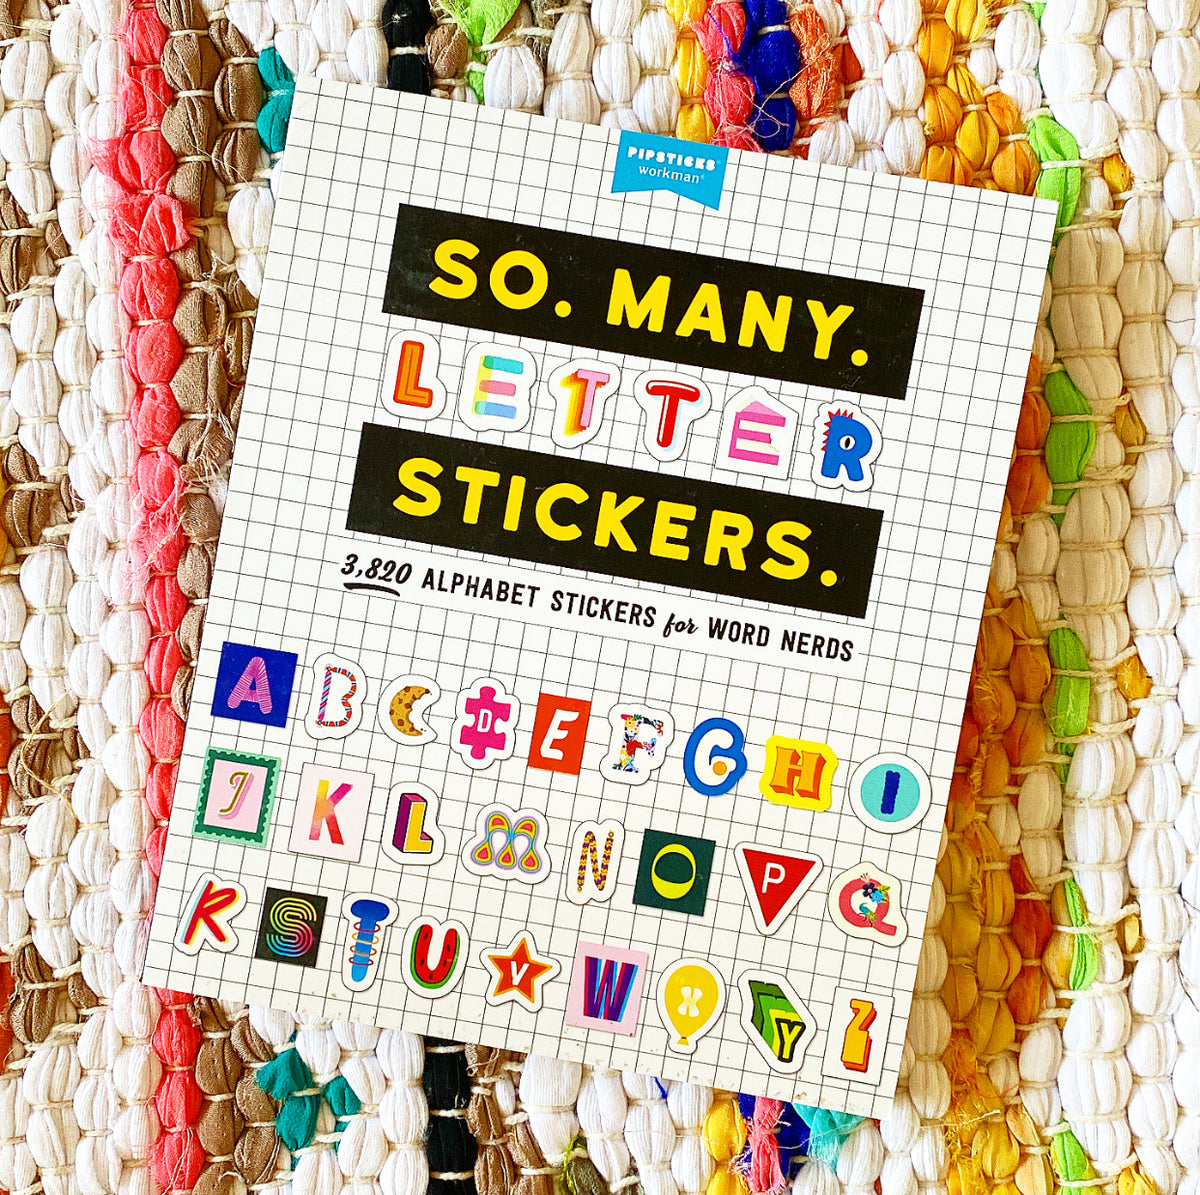 So. Many. Letter Stickers.: 3,820 Alphabet Stickers for Word Nerds